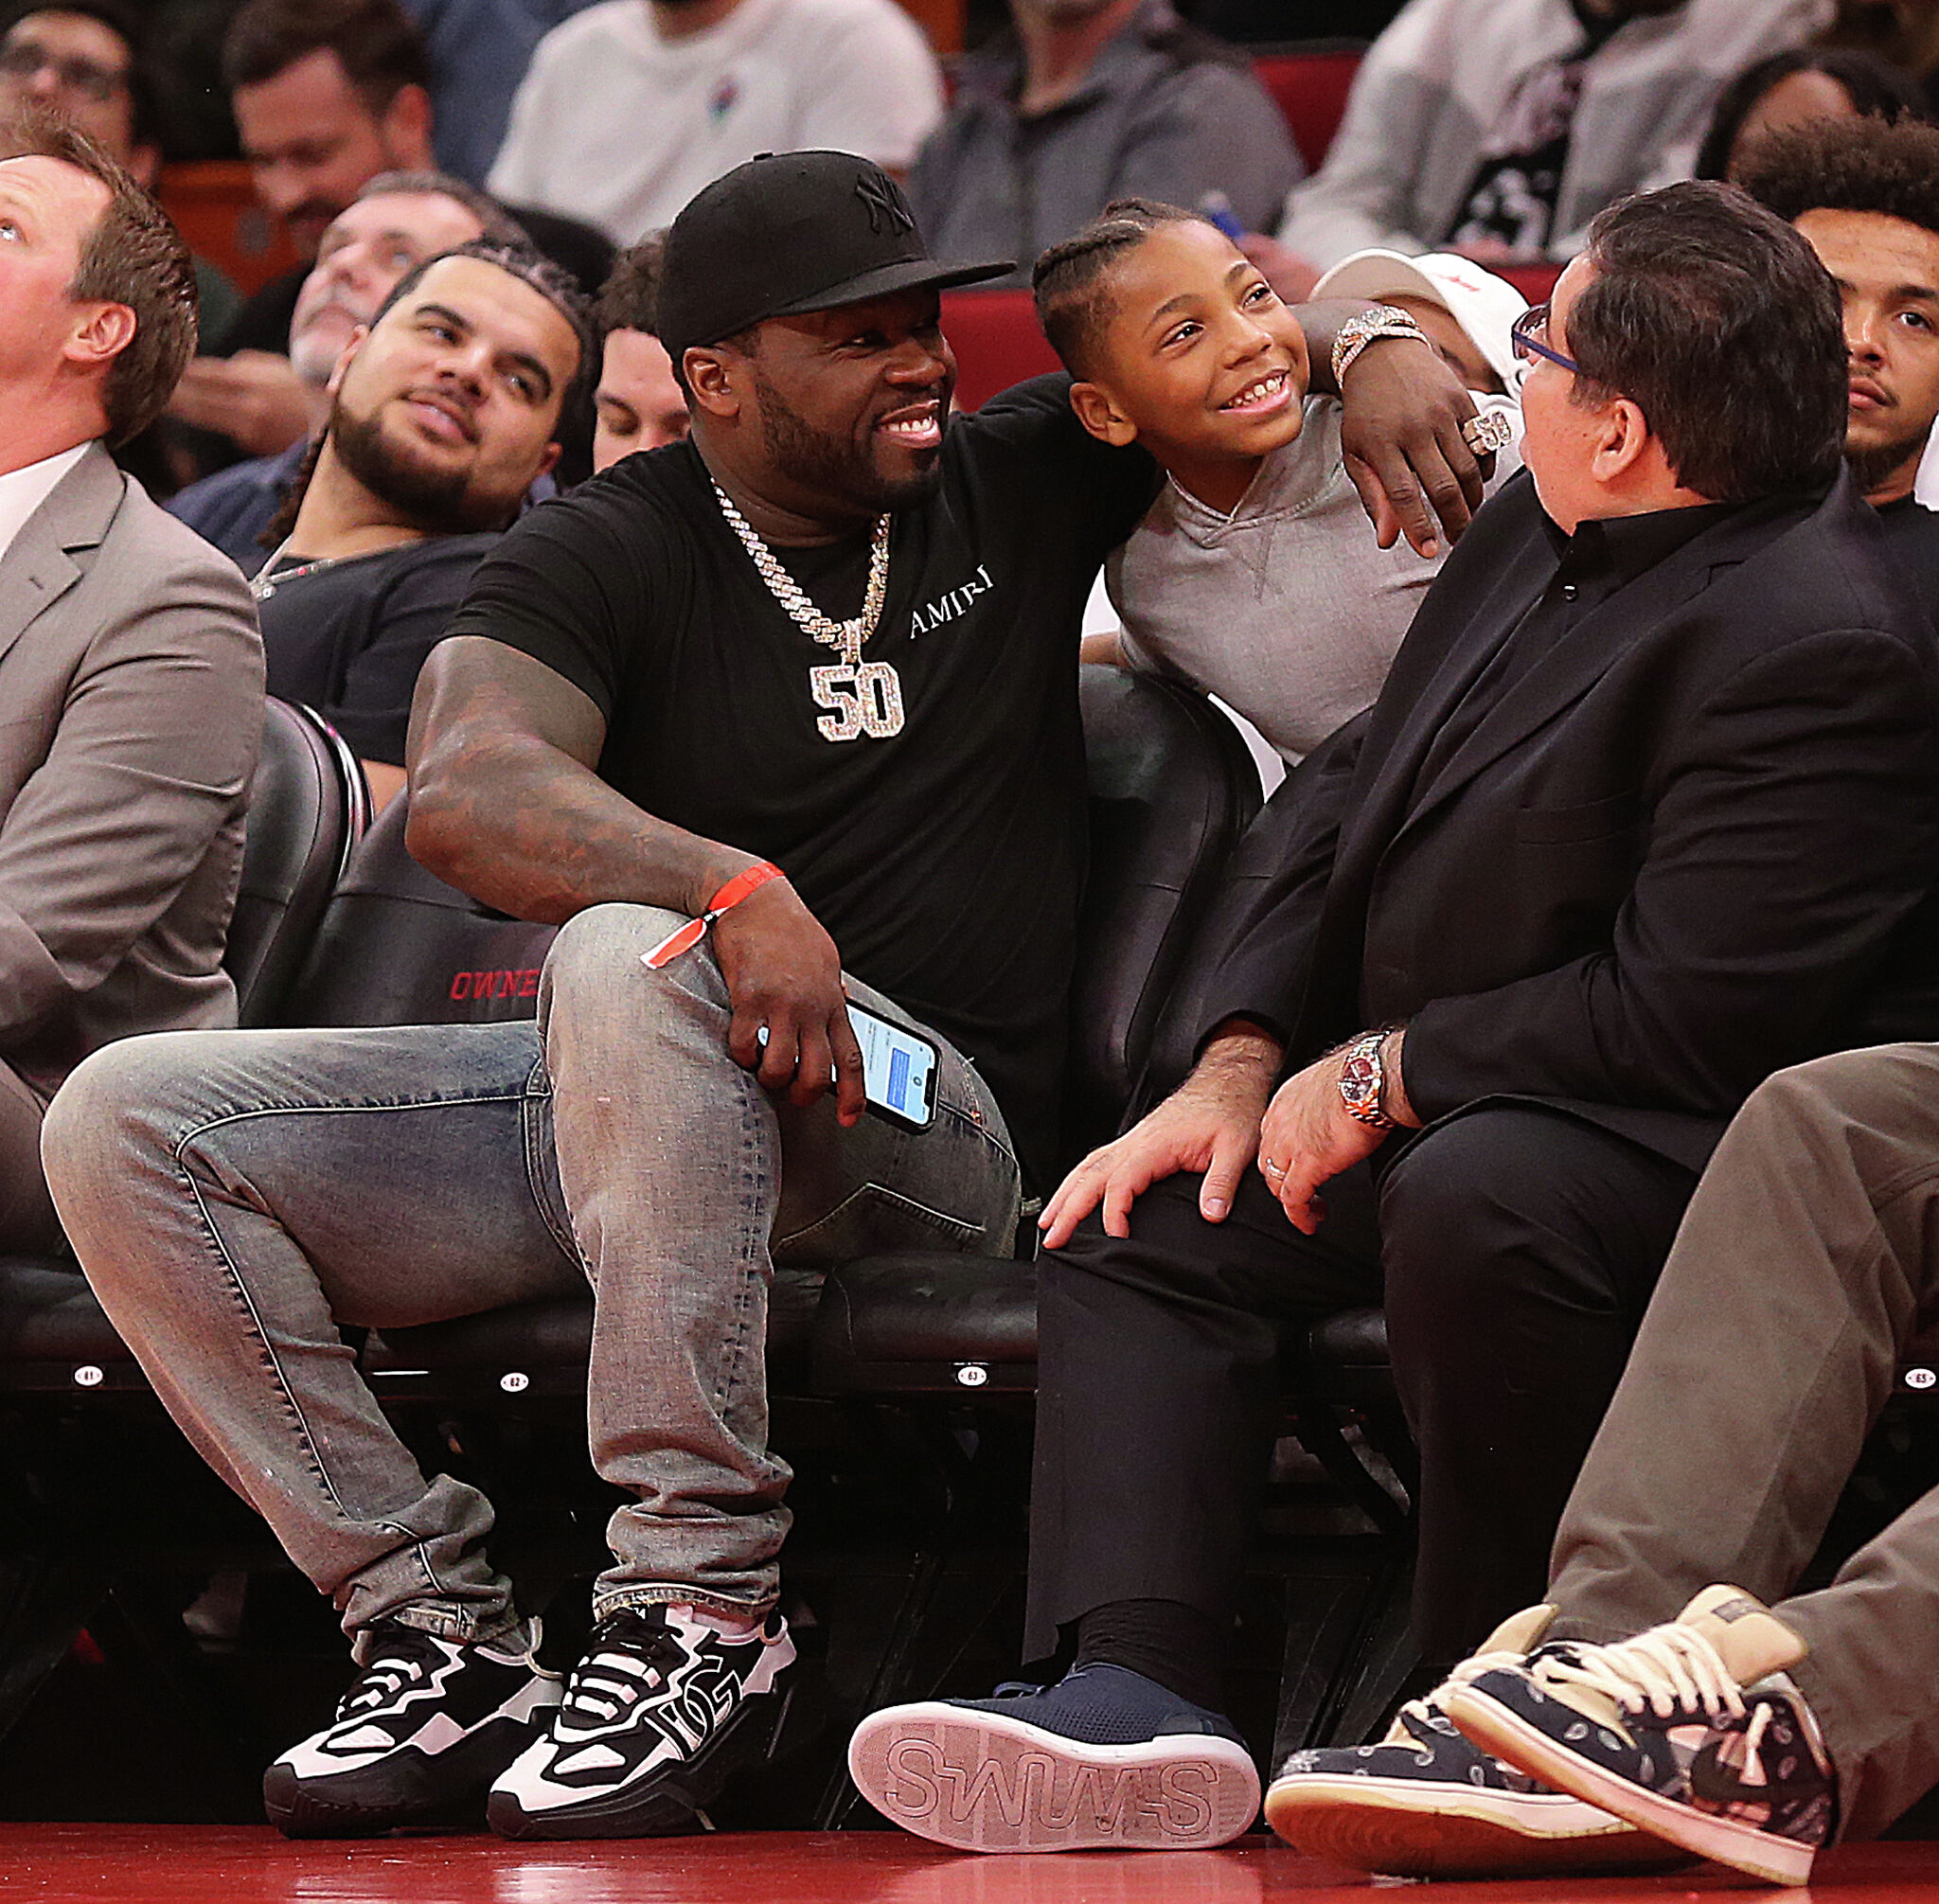 50 Cent continues to prove he's a real Houstonian with Rockets